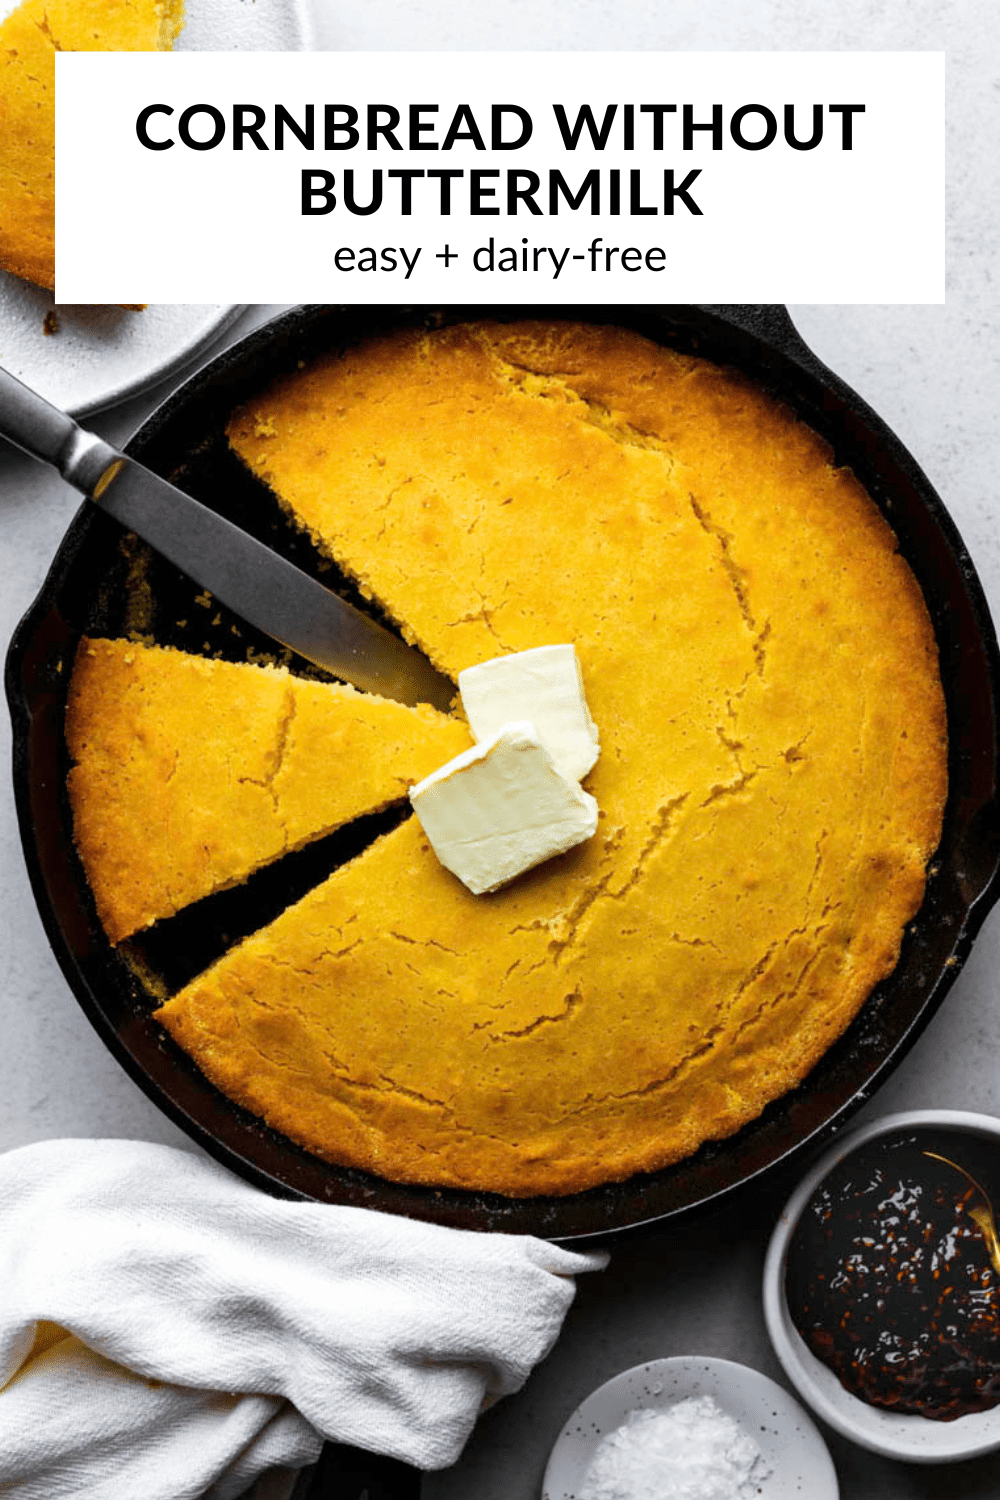 A photos of homemade cornbread in  cast iron skillet with text overlay "Easy cornbread without buttermilk".